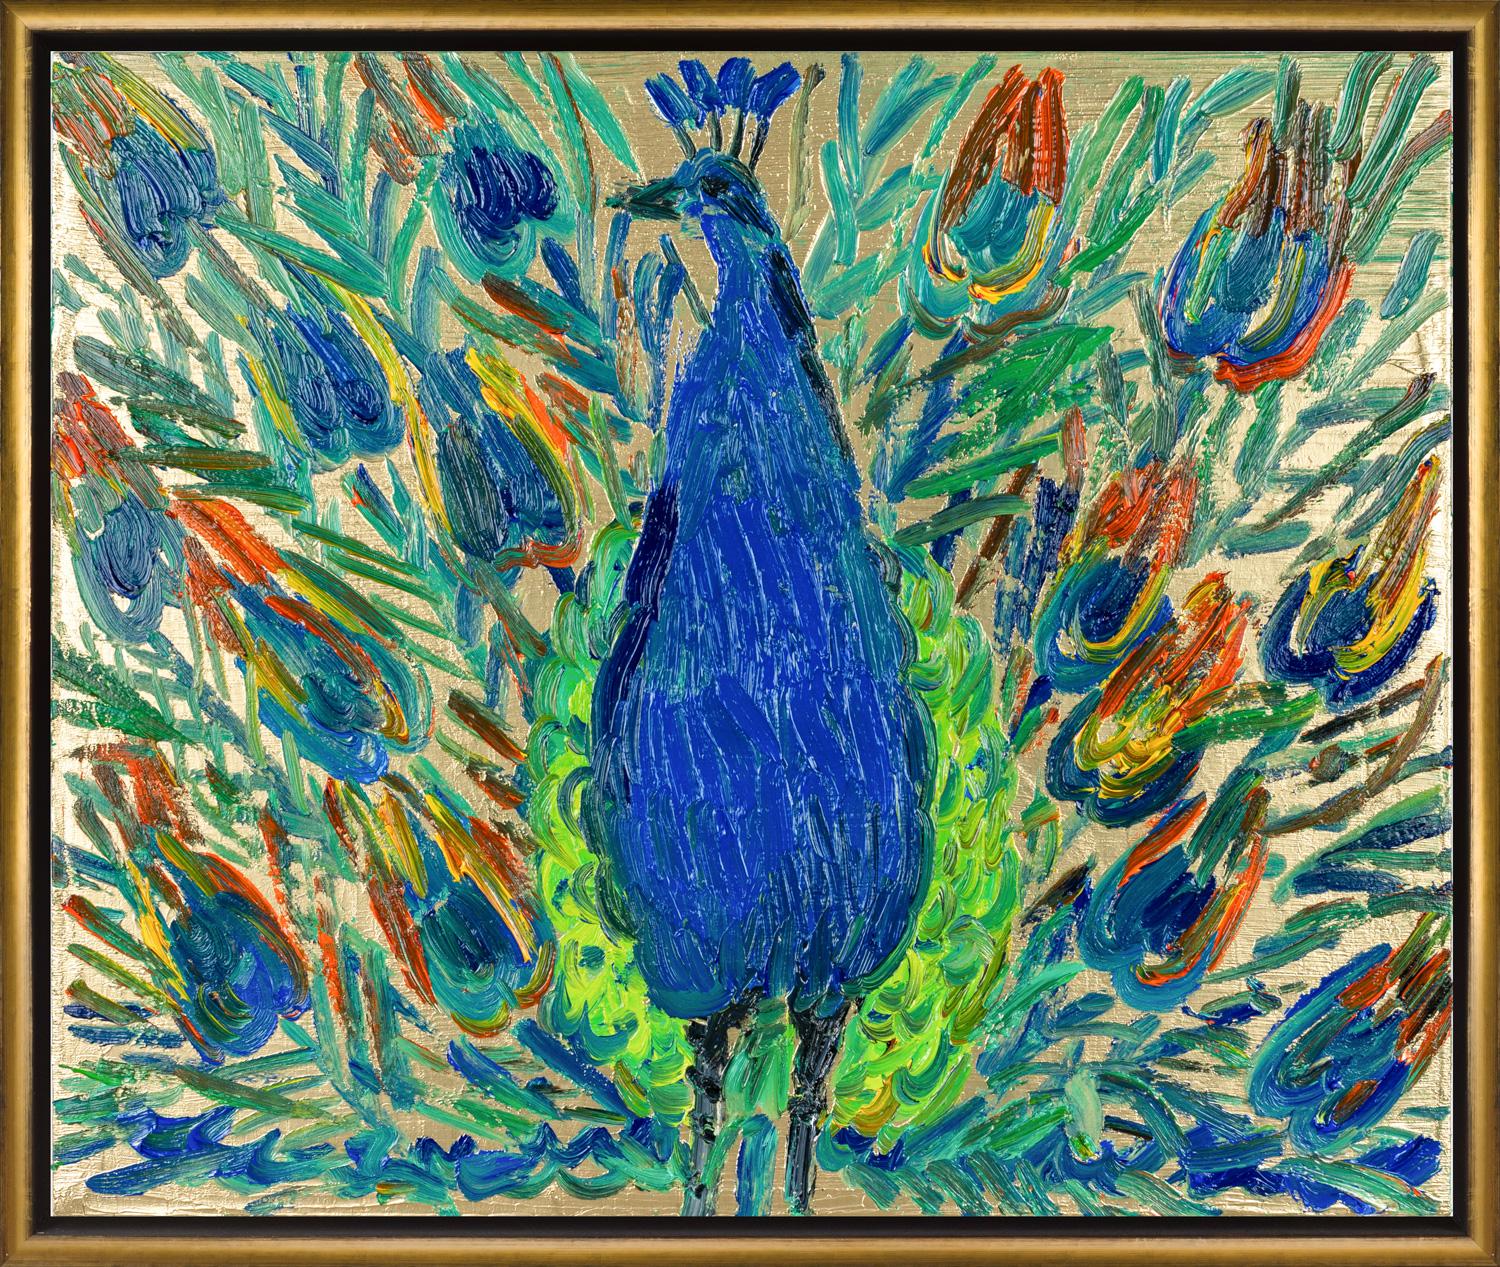 "Peacock Albania" is a neoexpressionist framed oil painting on canvas depicting a peacock with its feathers flared in front of a gold background

This piece is finished in a gold floater flame with a black woodgrain finish along the frames sides and